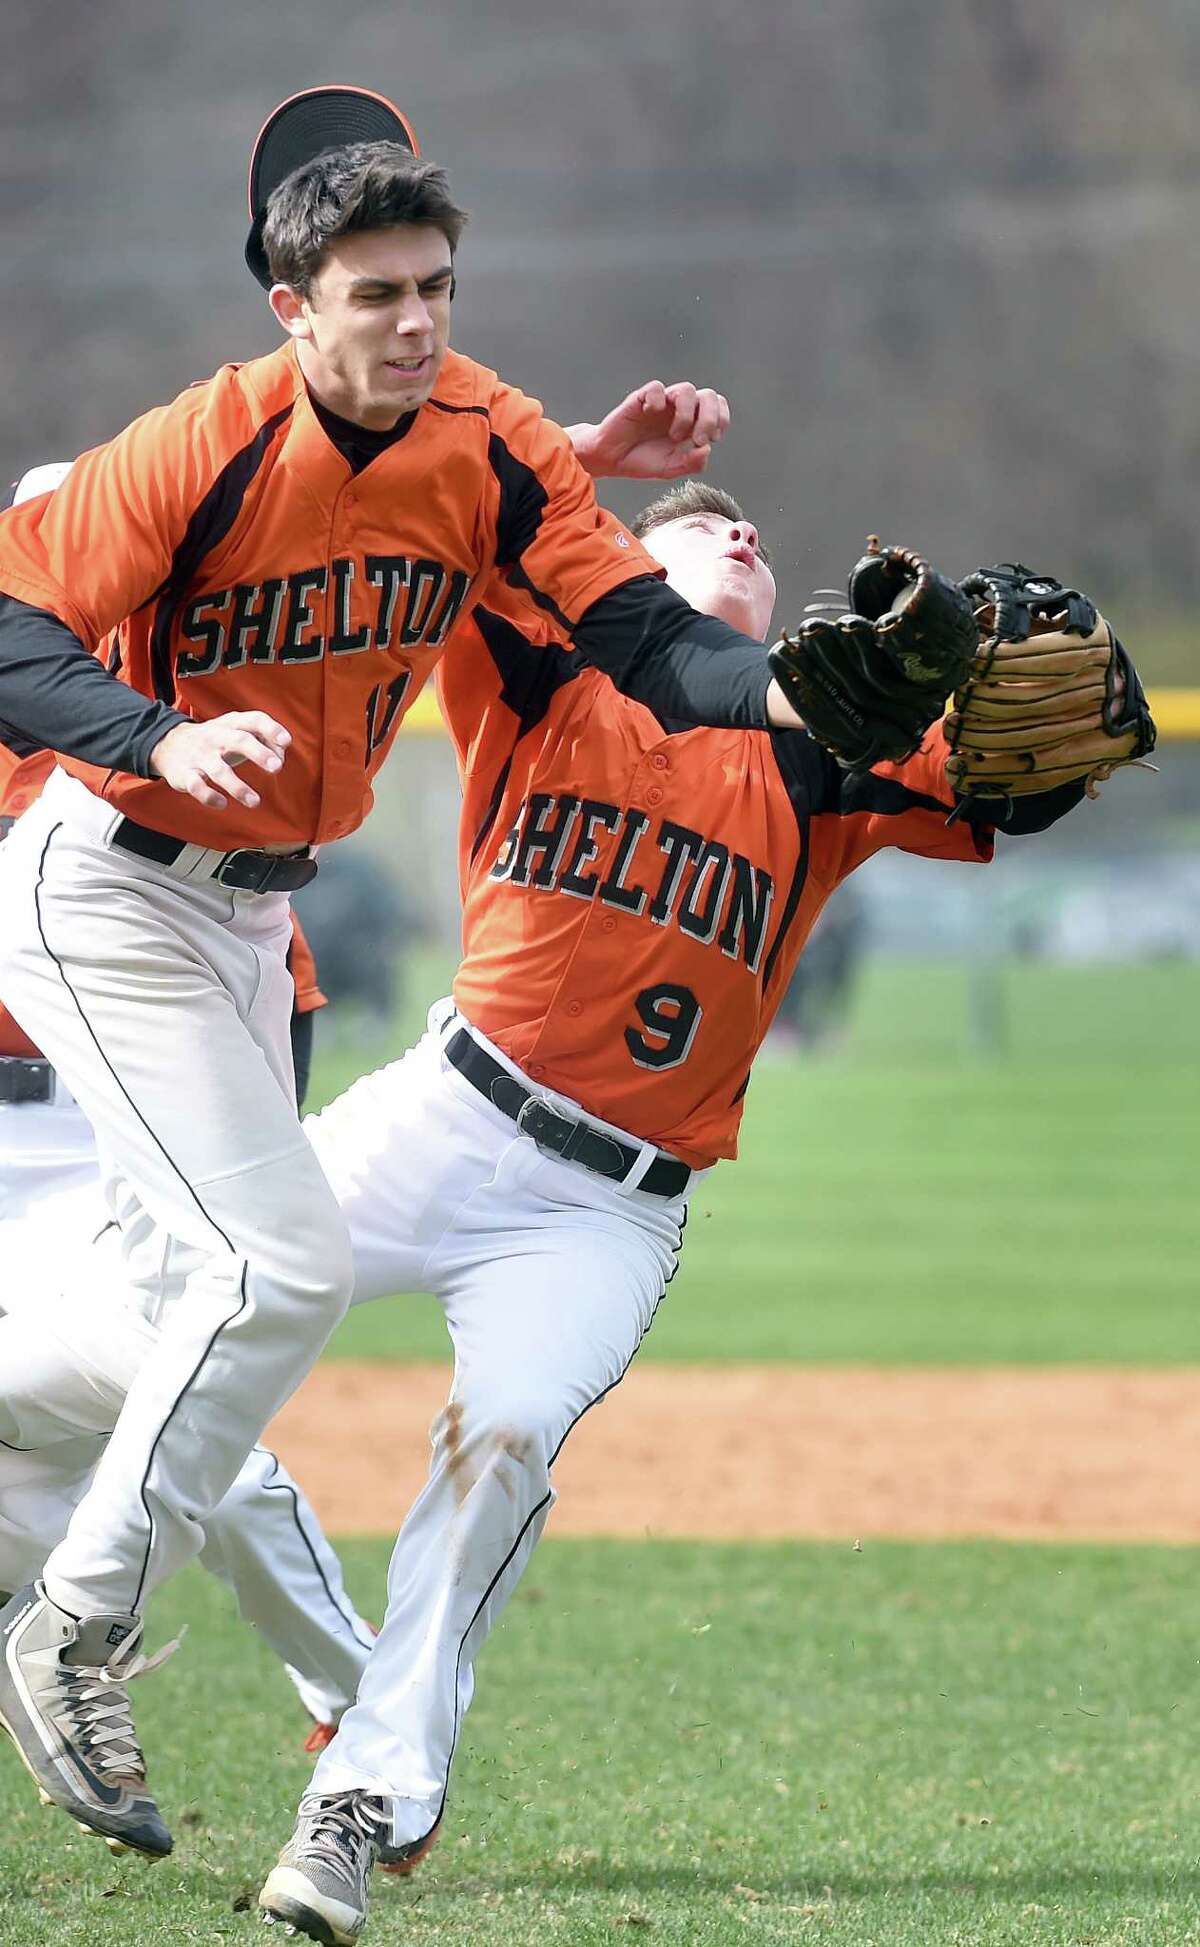 Shelton pitcher Will Ciccone (left) and Dylan DeSio collide while fielding a pop up in the infield against Amity in Woodbridge on April 30, 2018. Ciccone made the catch.